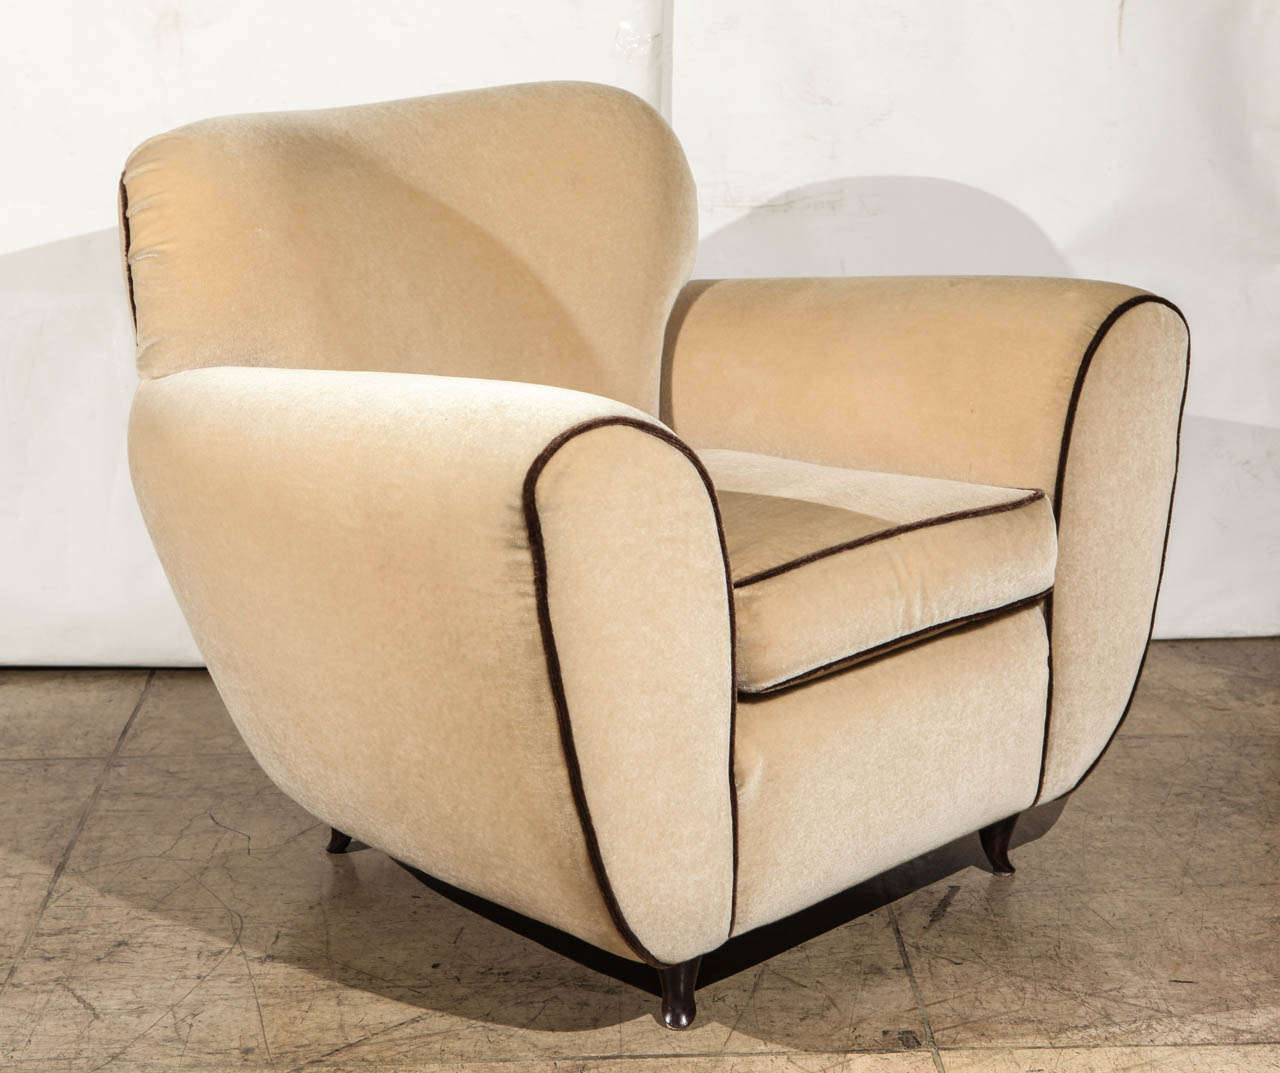 An elegant and very comfortable pair of Art Deco armchairs by Paolo Buffa. Upholstered in a light beige mohair with dark brown mohair piping. Accented with graceful original curved wood legs.